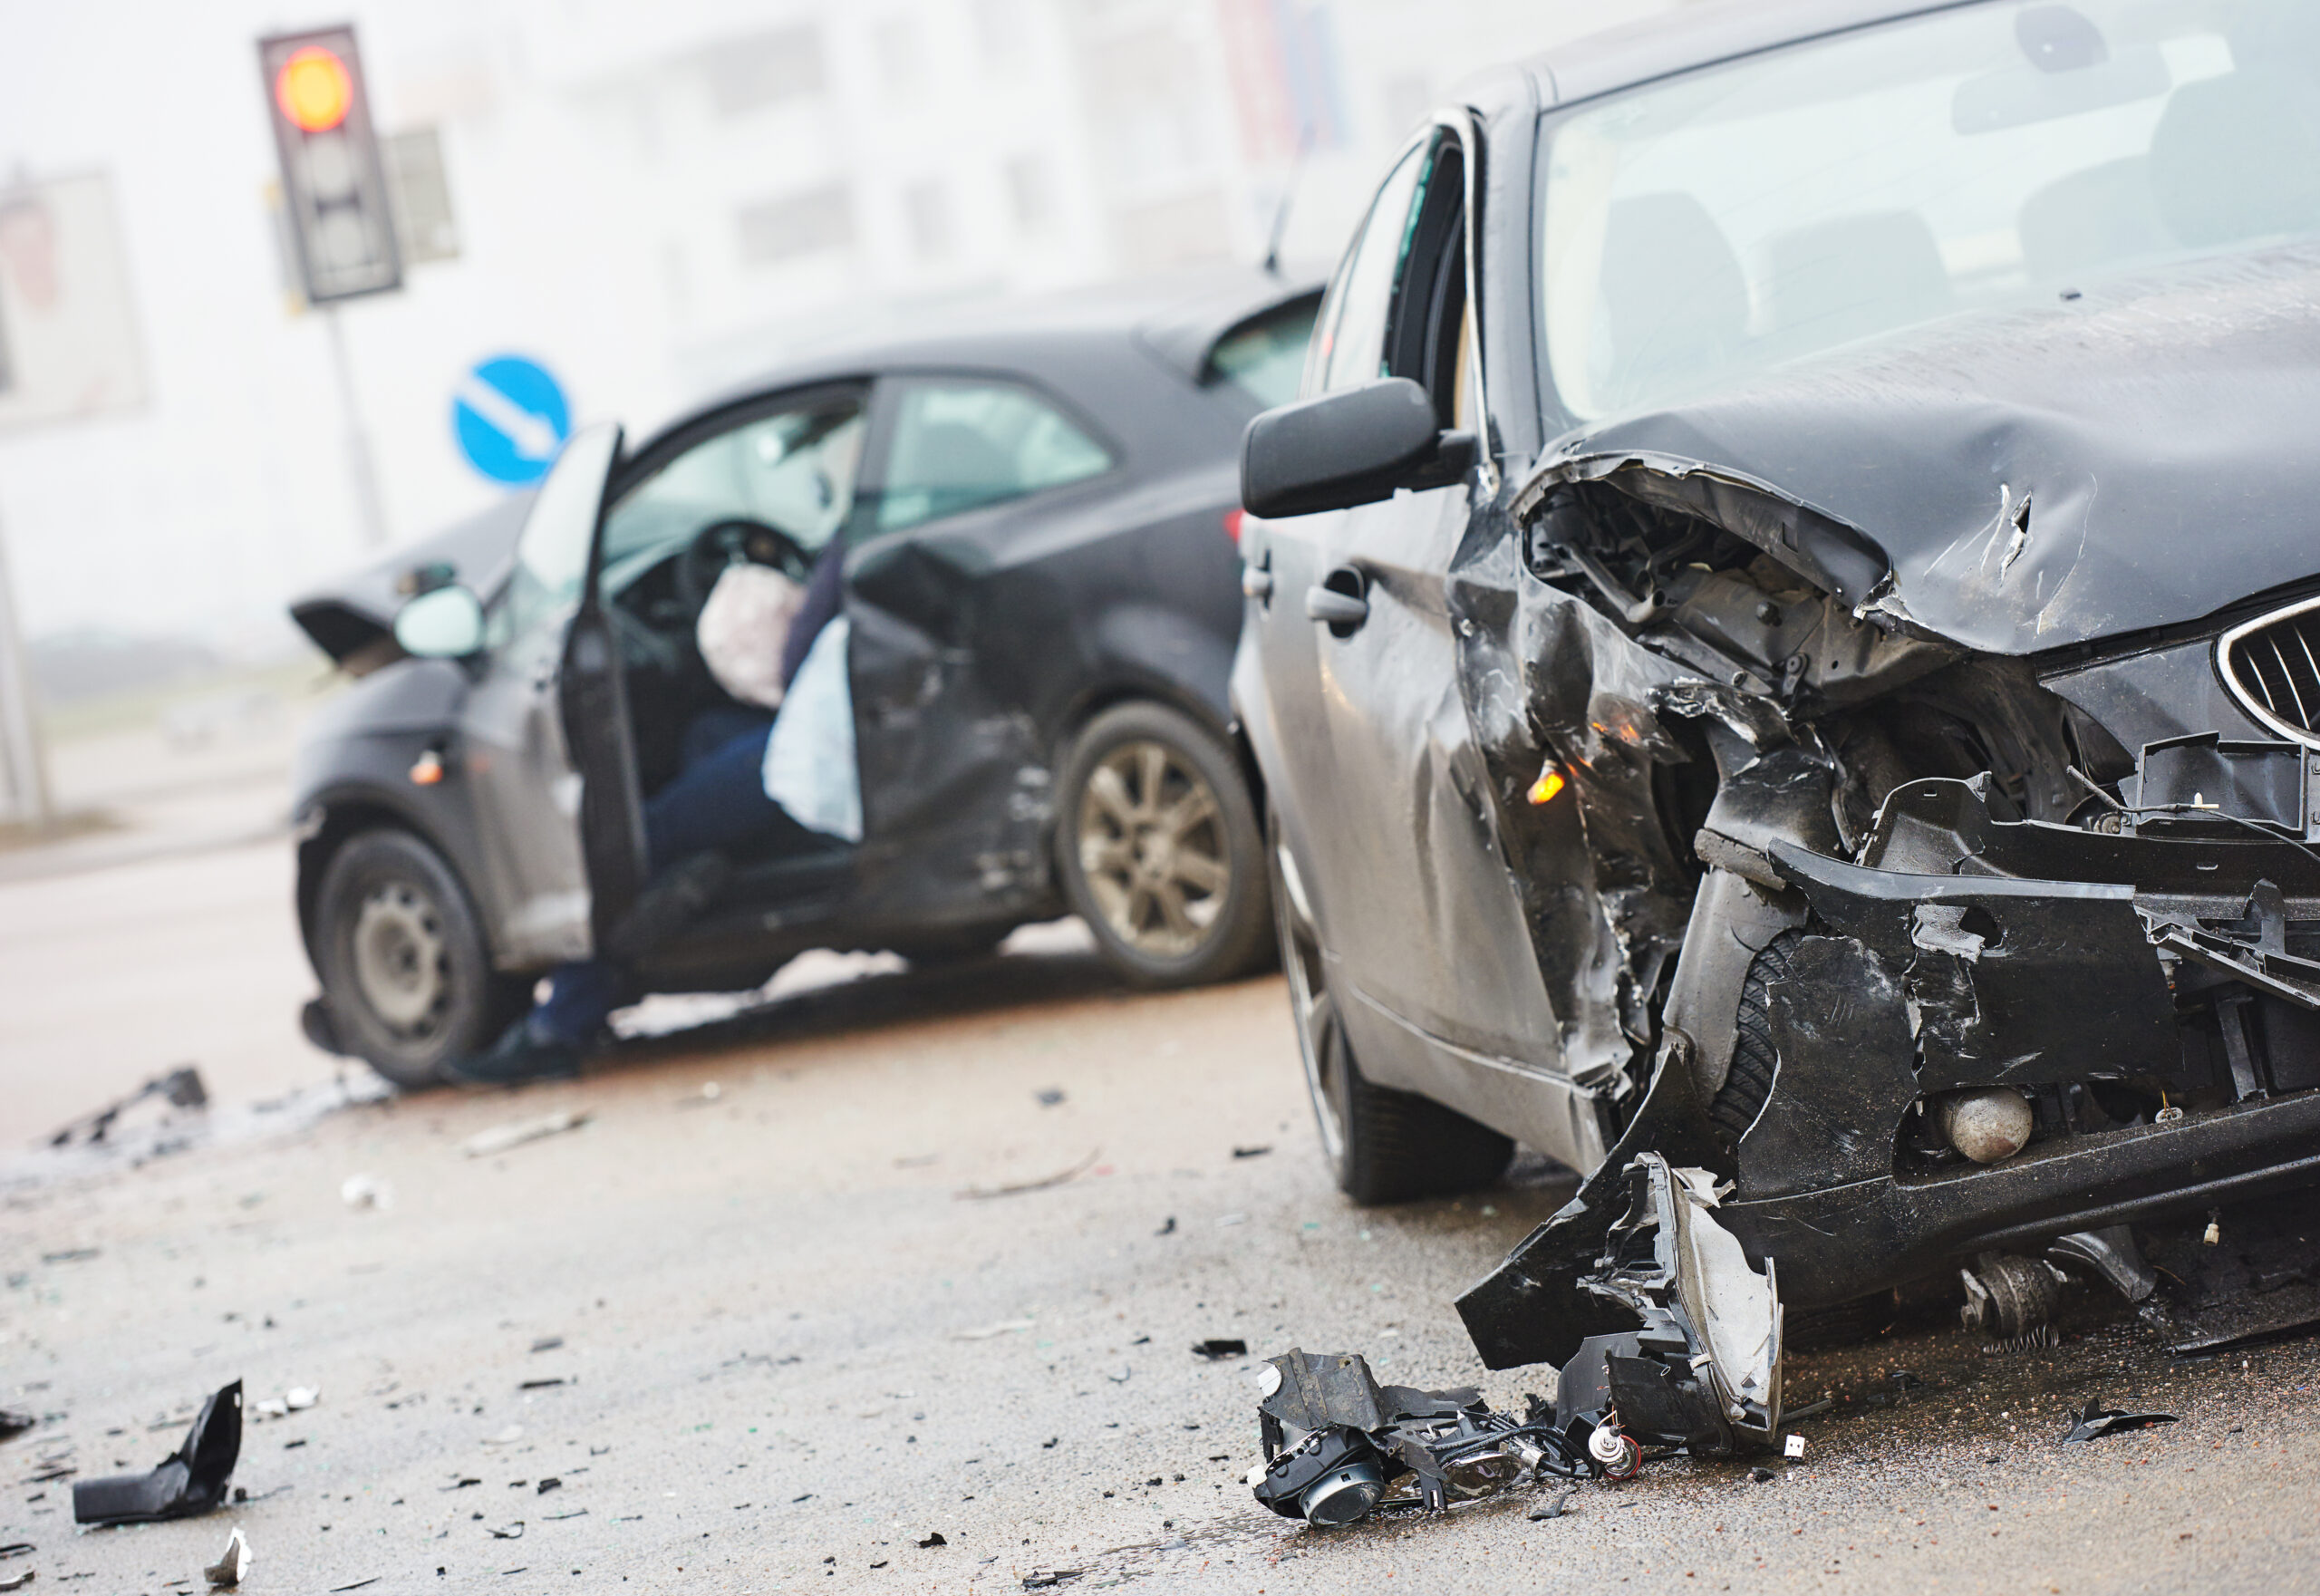 car crash accident on street, damaged automobiles after collision in city. Get protected with personal umbrella liability